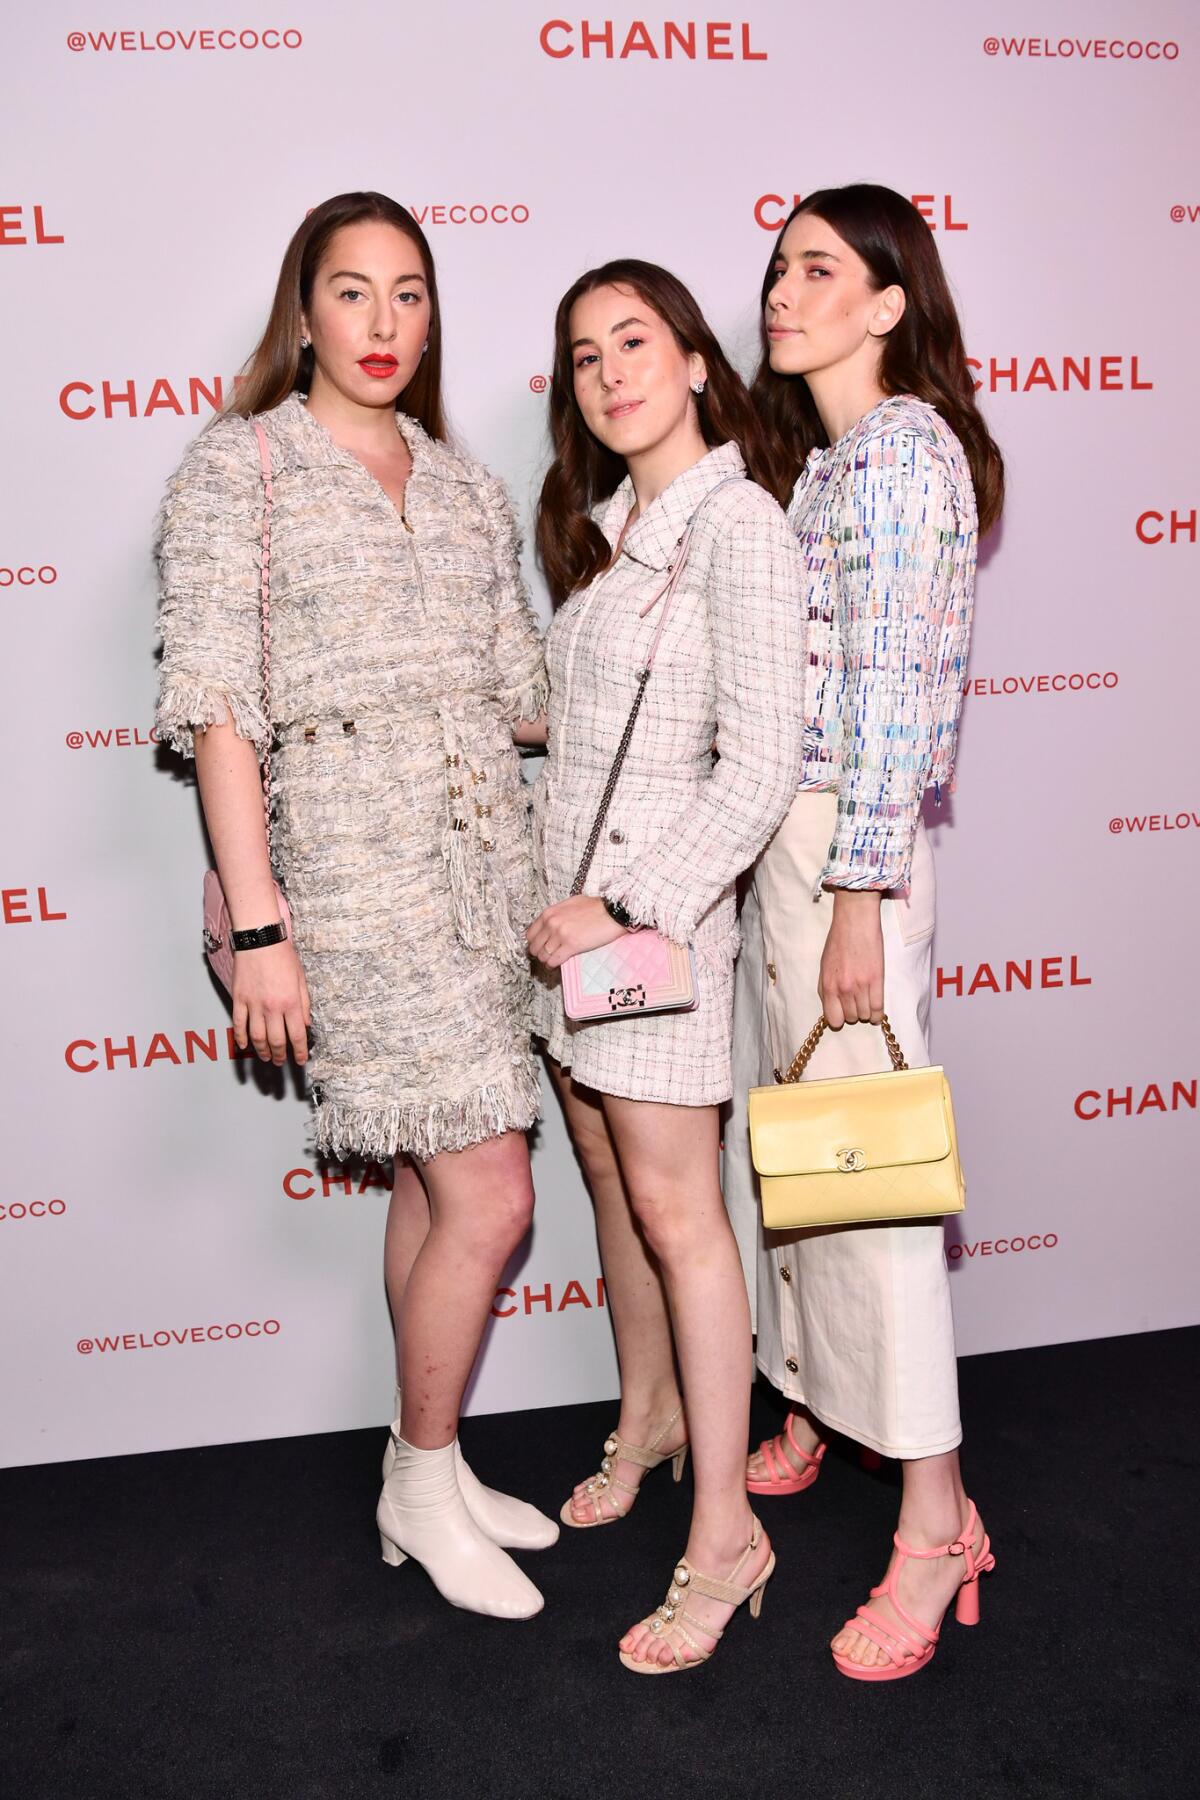 Este, left, Alana and Danielle Haim of Haim, all wearing Chanel, attend a private party at the Chanel Beauty House popup on Sunset Boulevard in West Hollywood.